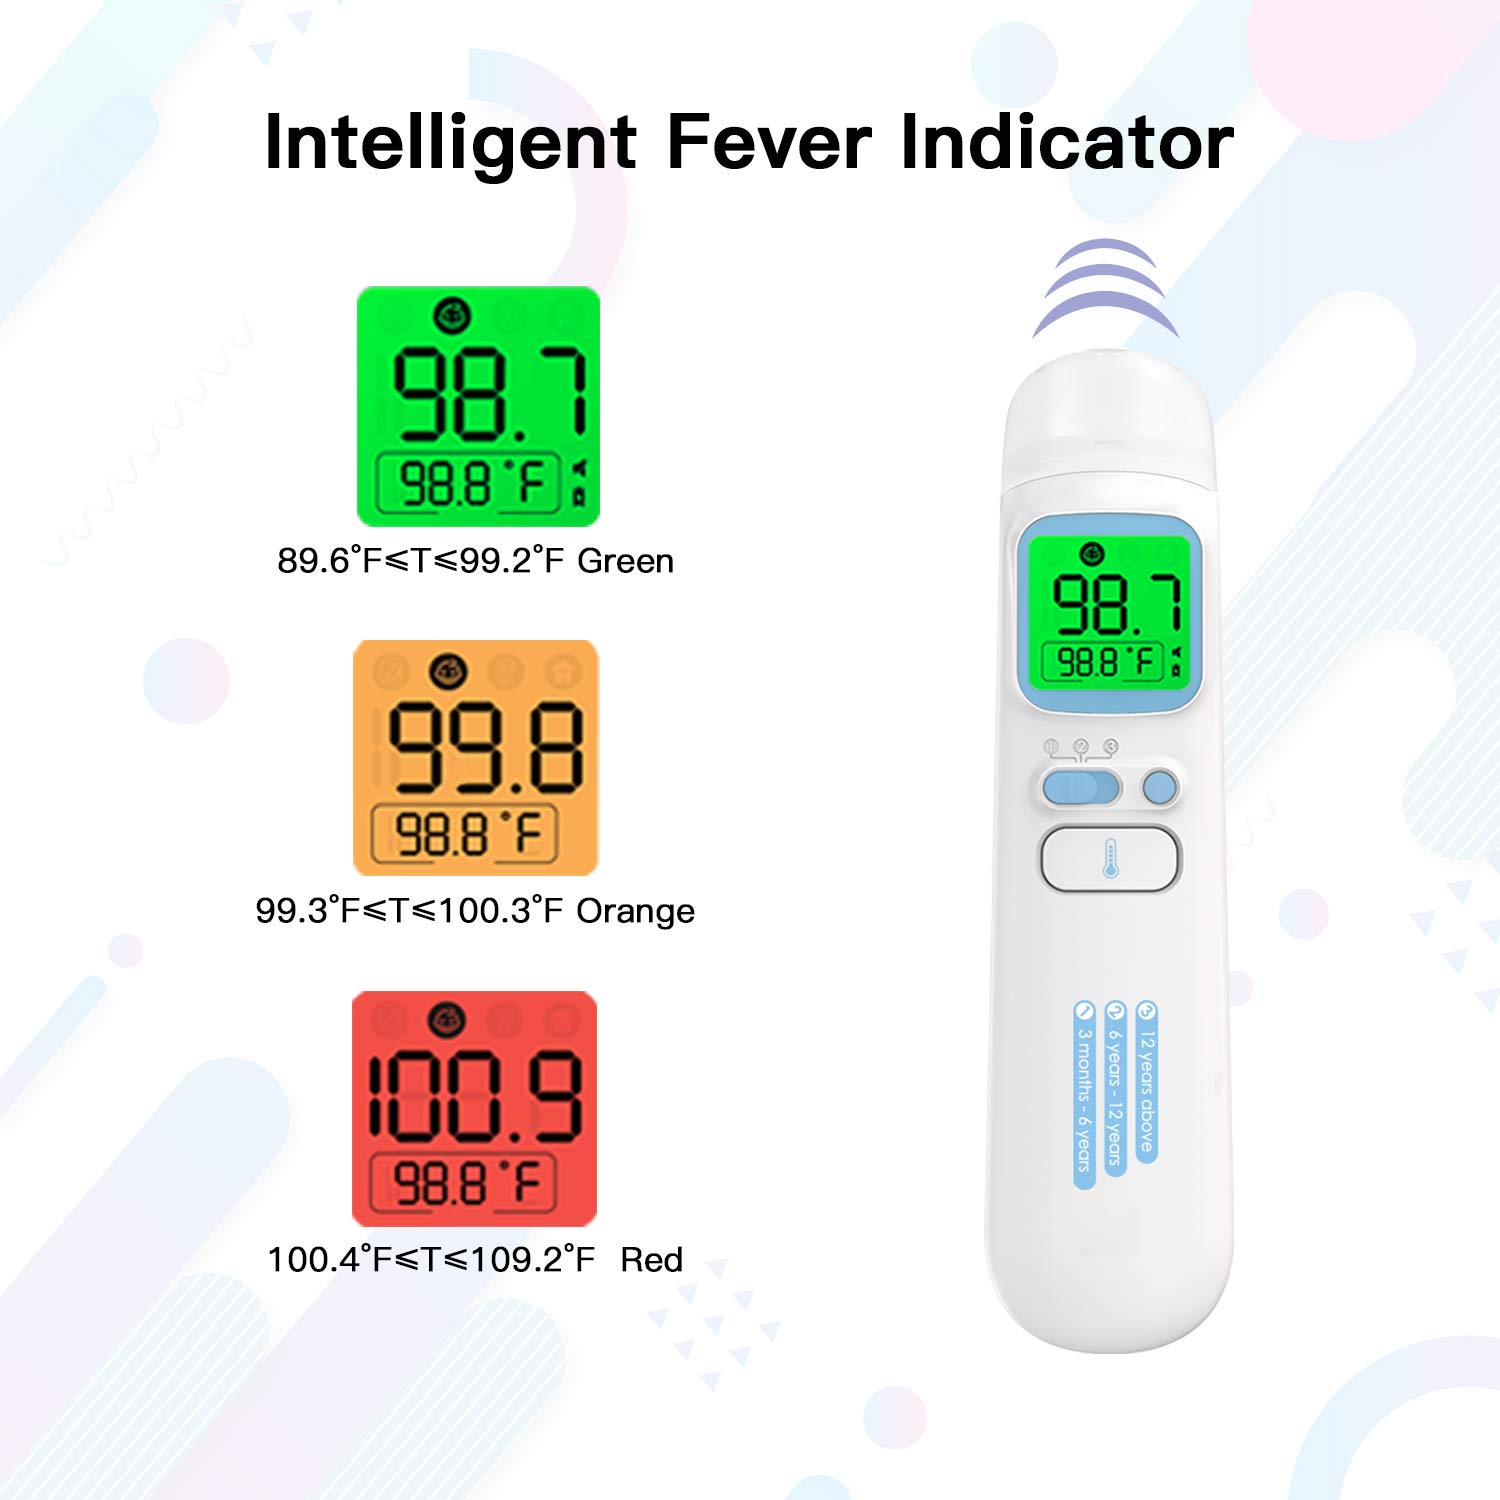 GoodBaby Touchless Thermometer for Adults,Forehead and Ear Thermometer for Fever,Infrared Magnetic Thermometer for Baby Kids Adults Surface and Room